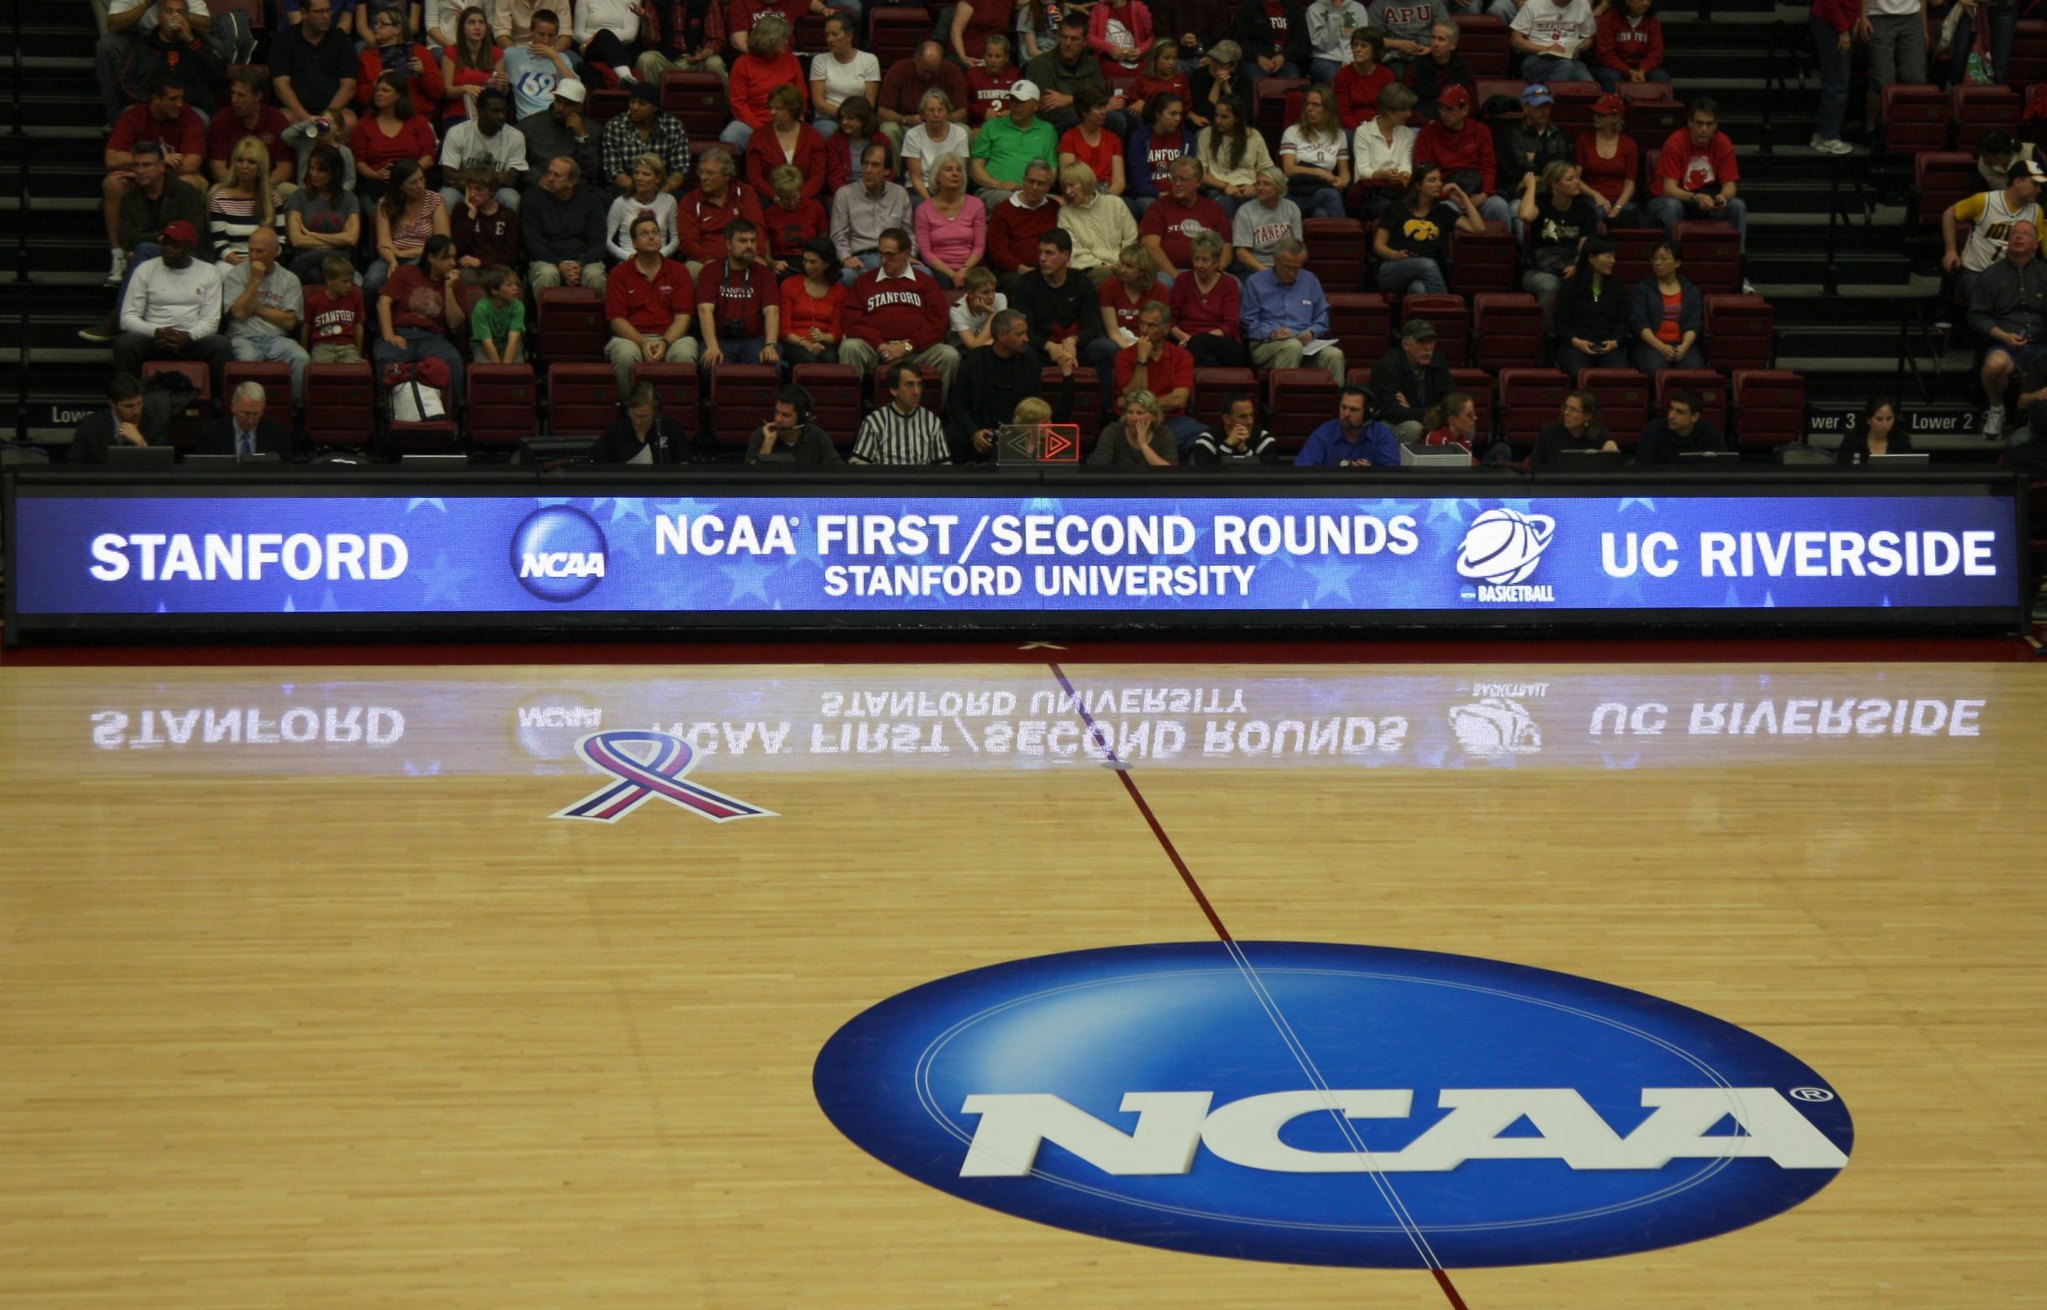 The National Collegiate Athletic Association (NCAA)'s logo at the center of a collegiate basketball court.